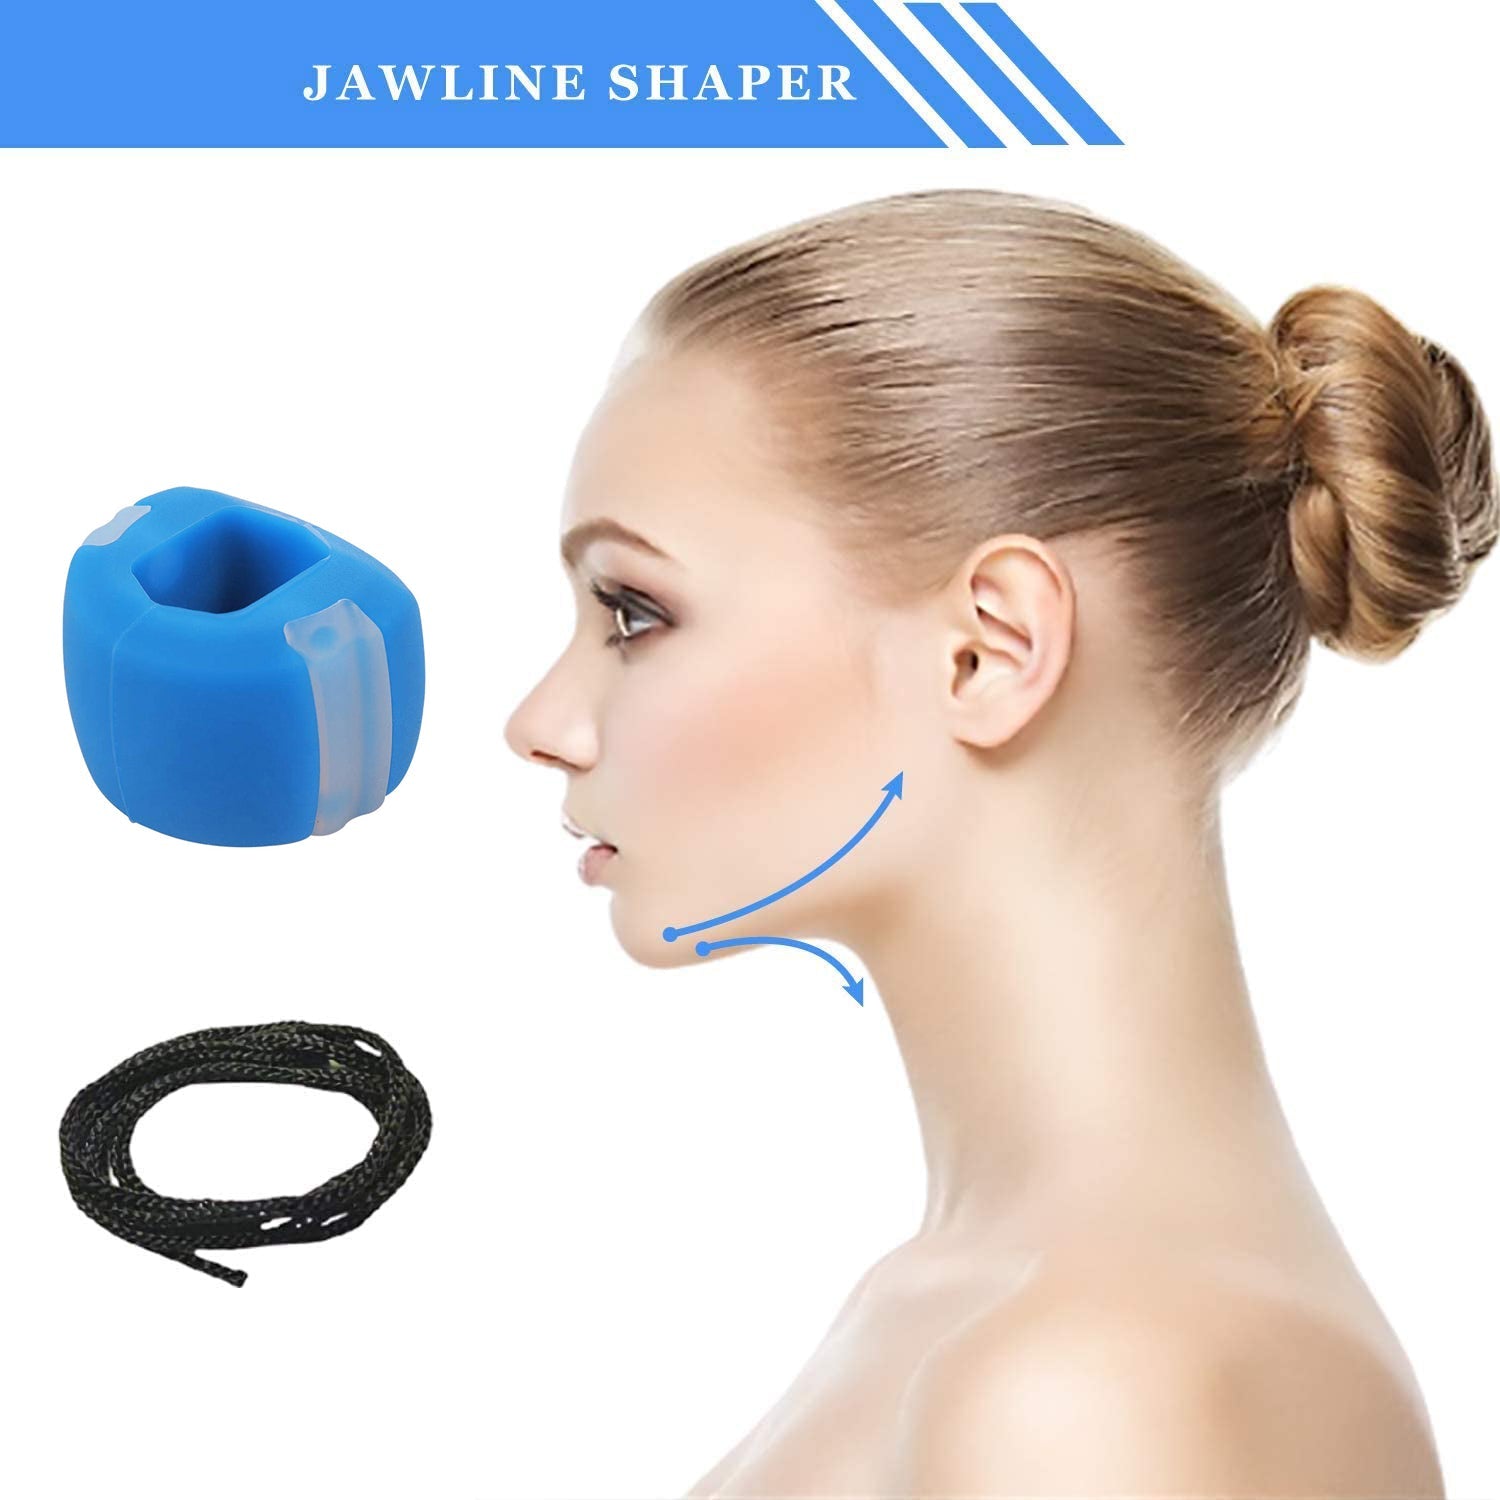 6128 DARK BLUE JAW EXERCISER USED TO GAIN SHARP AND CHISELLED JAWLINE EASILY AND FAST. DeoDap